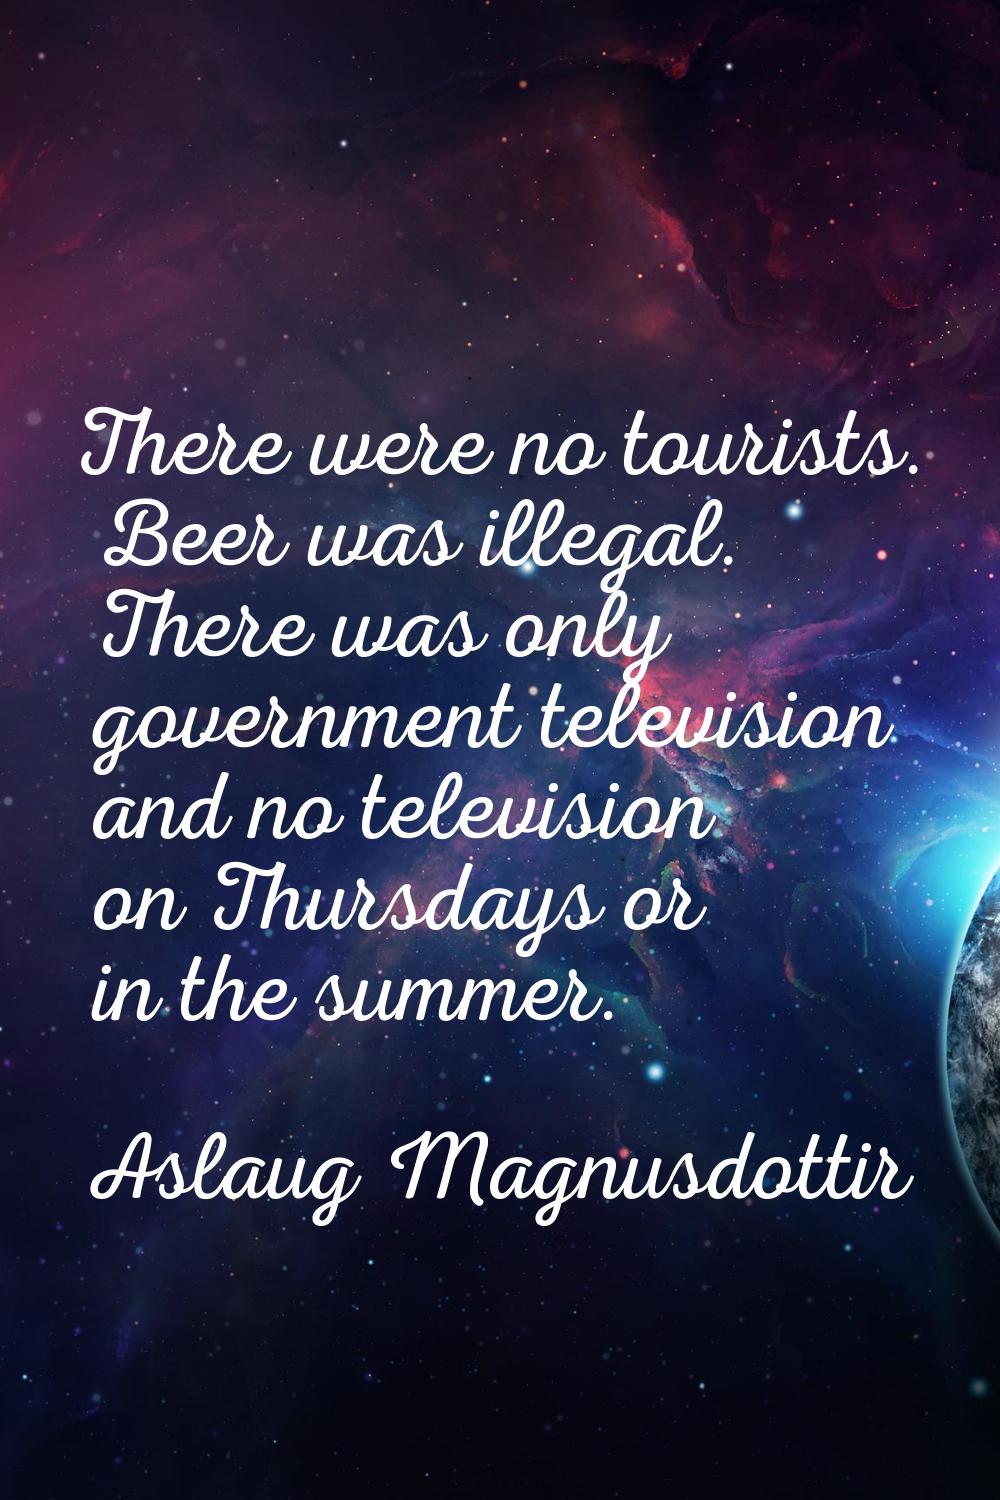 There were no tourists. Beer was illegal. There was only government television and no television on